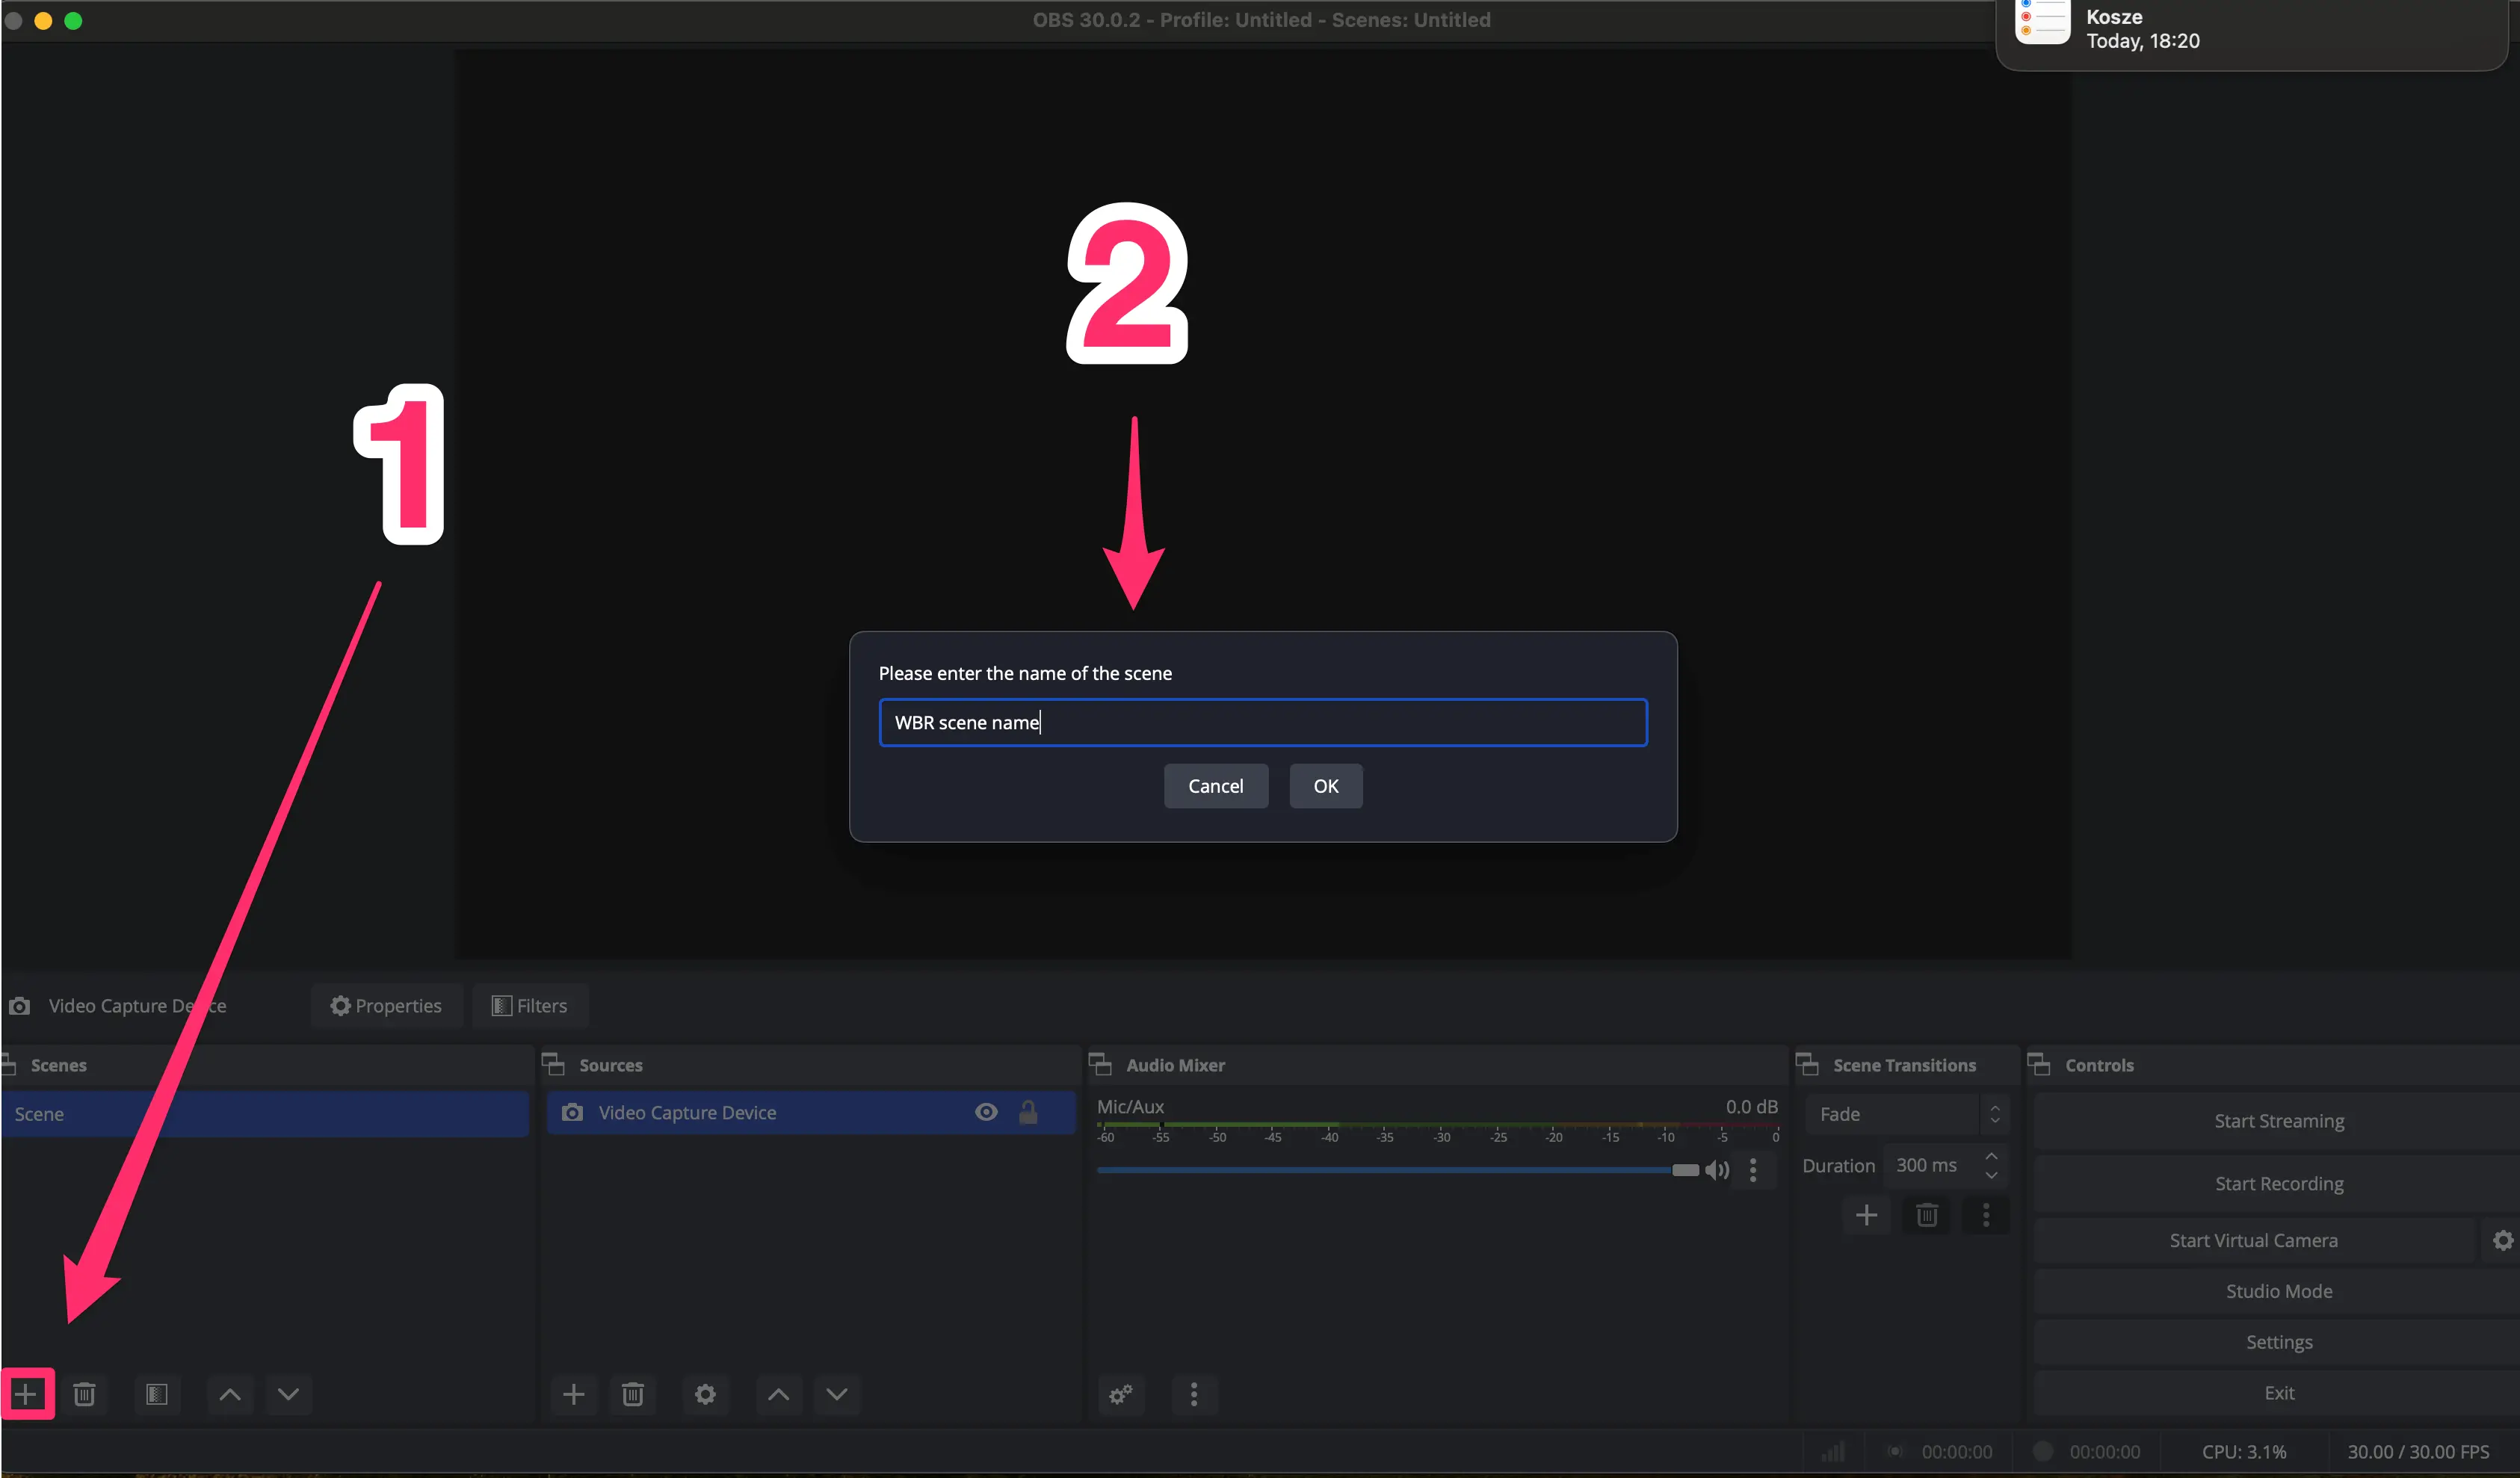 A screenshot of the OBS software interface with a dialog box prompting for the name of a new scene, with a number "2" and an arrow indicating the input field.